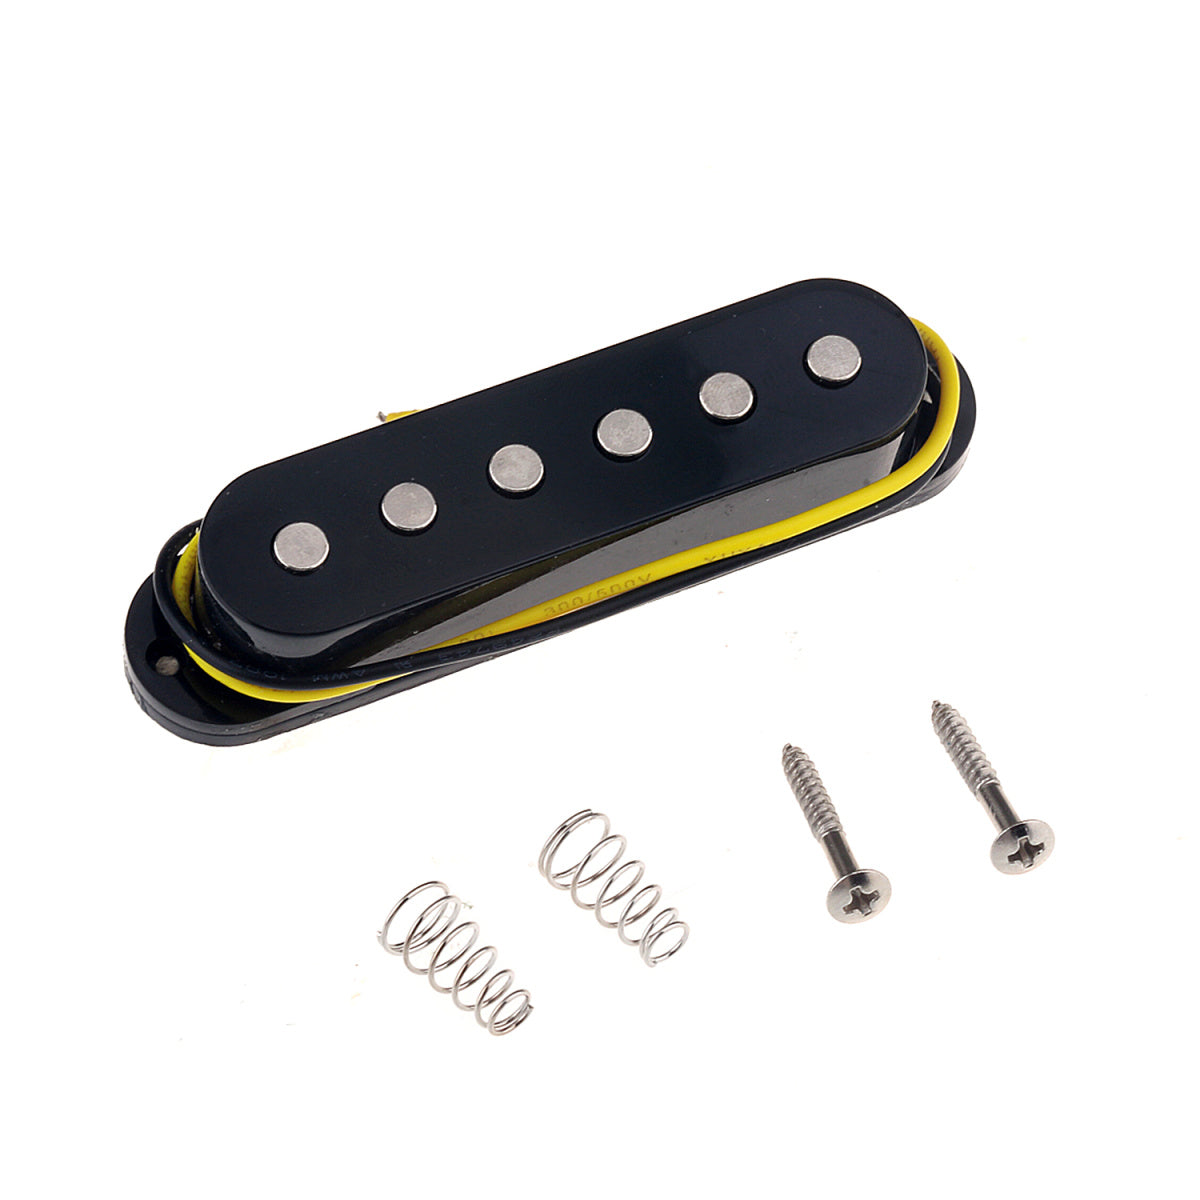 Musiclily 52mm Guitar Single coil Bridge Pickup for Strat or Squier  Style,Black